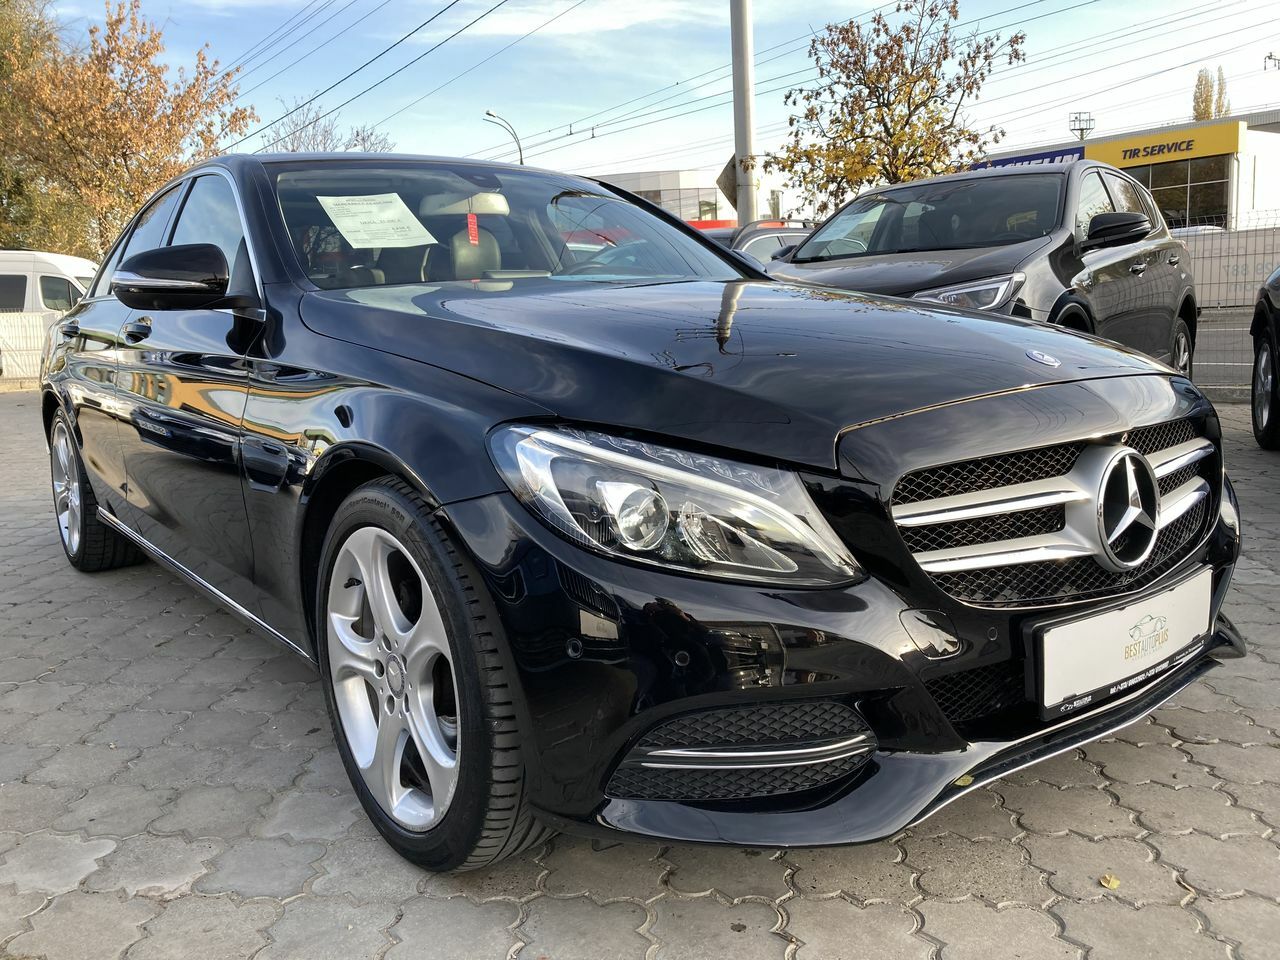 <span style="font-weight: bold;">mercedes c class</span>